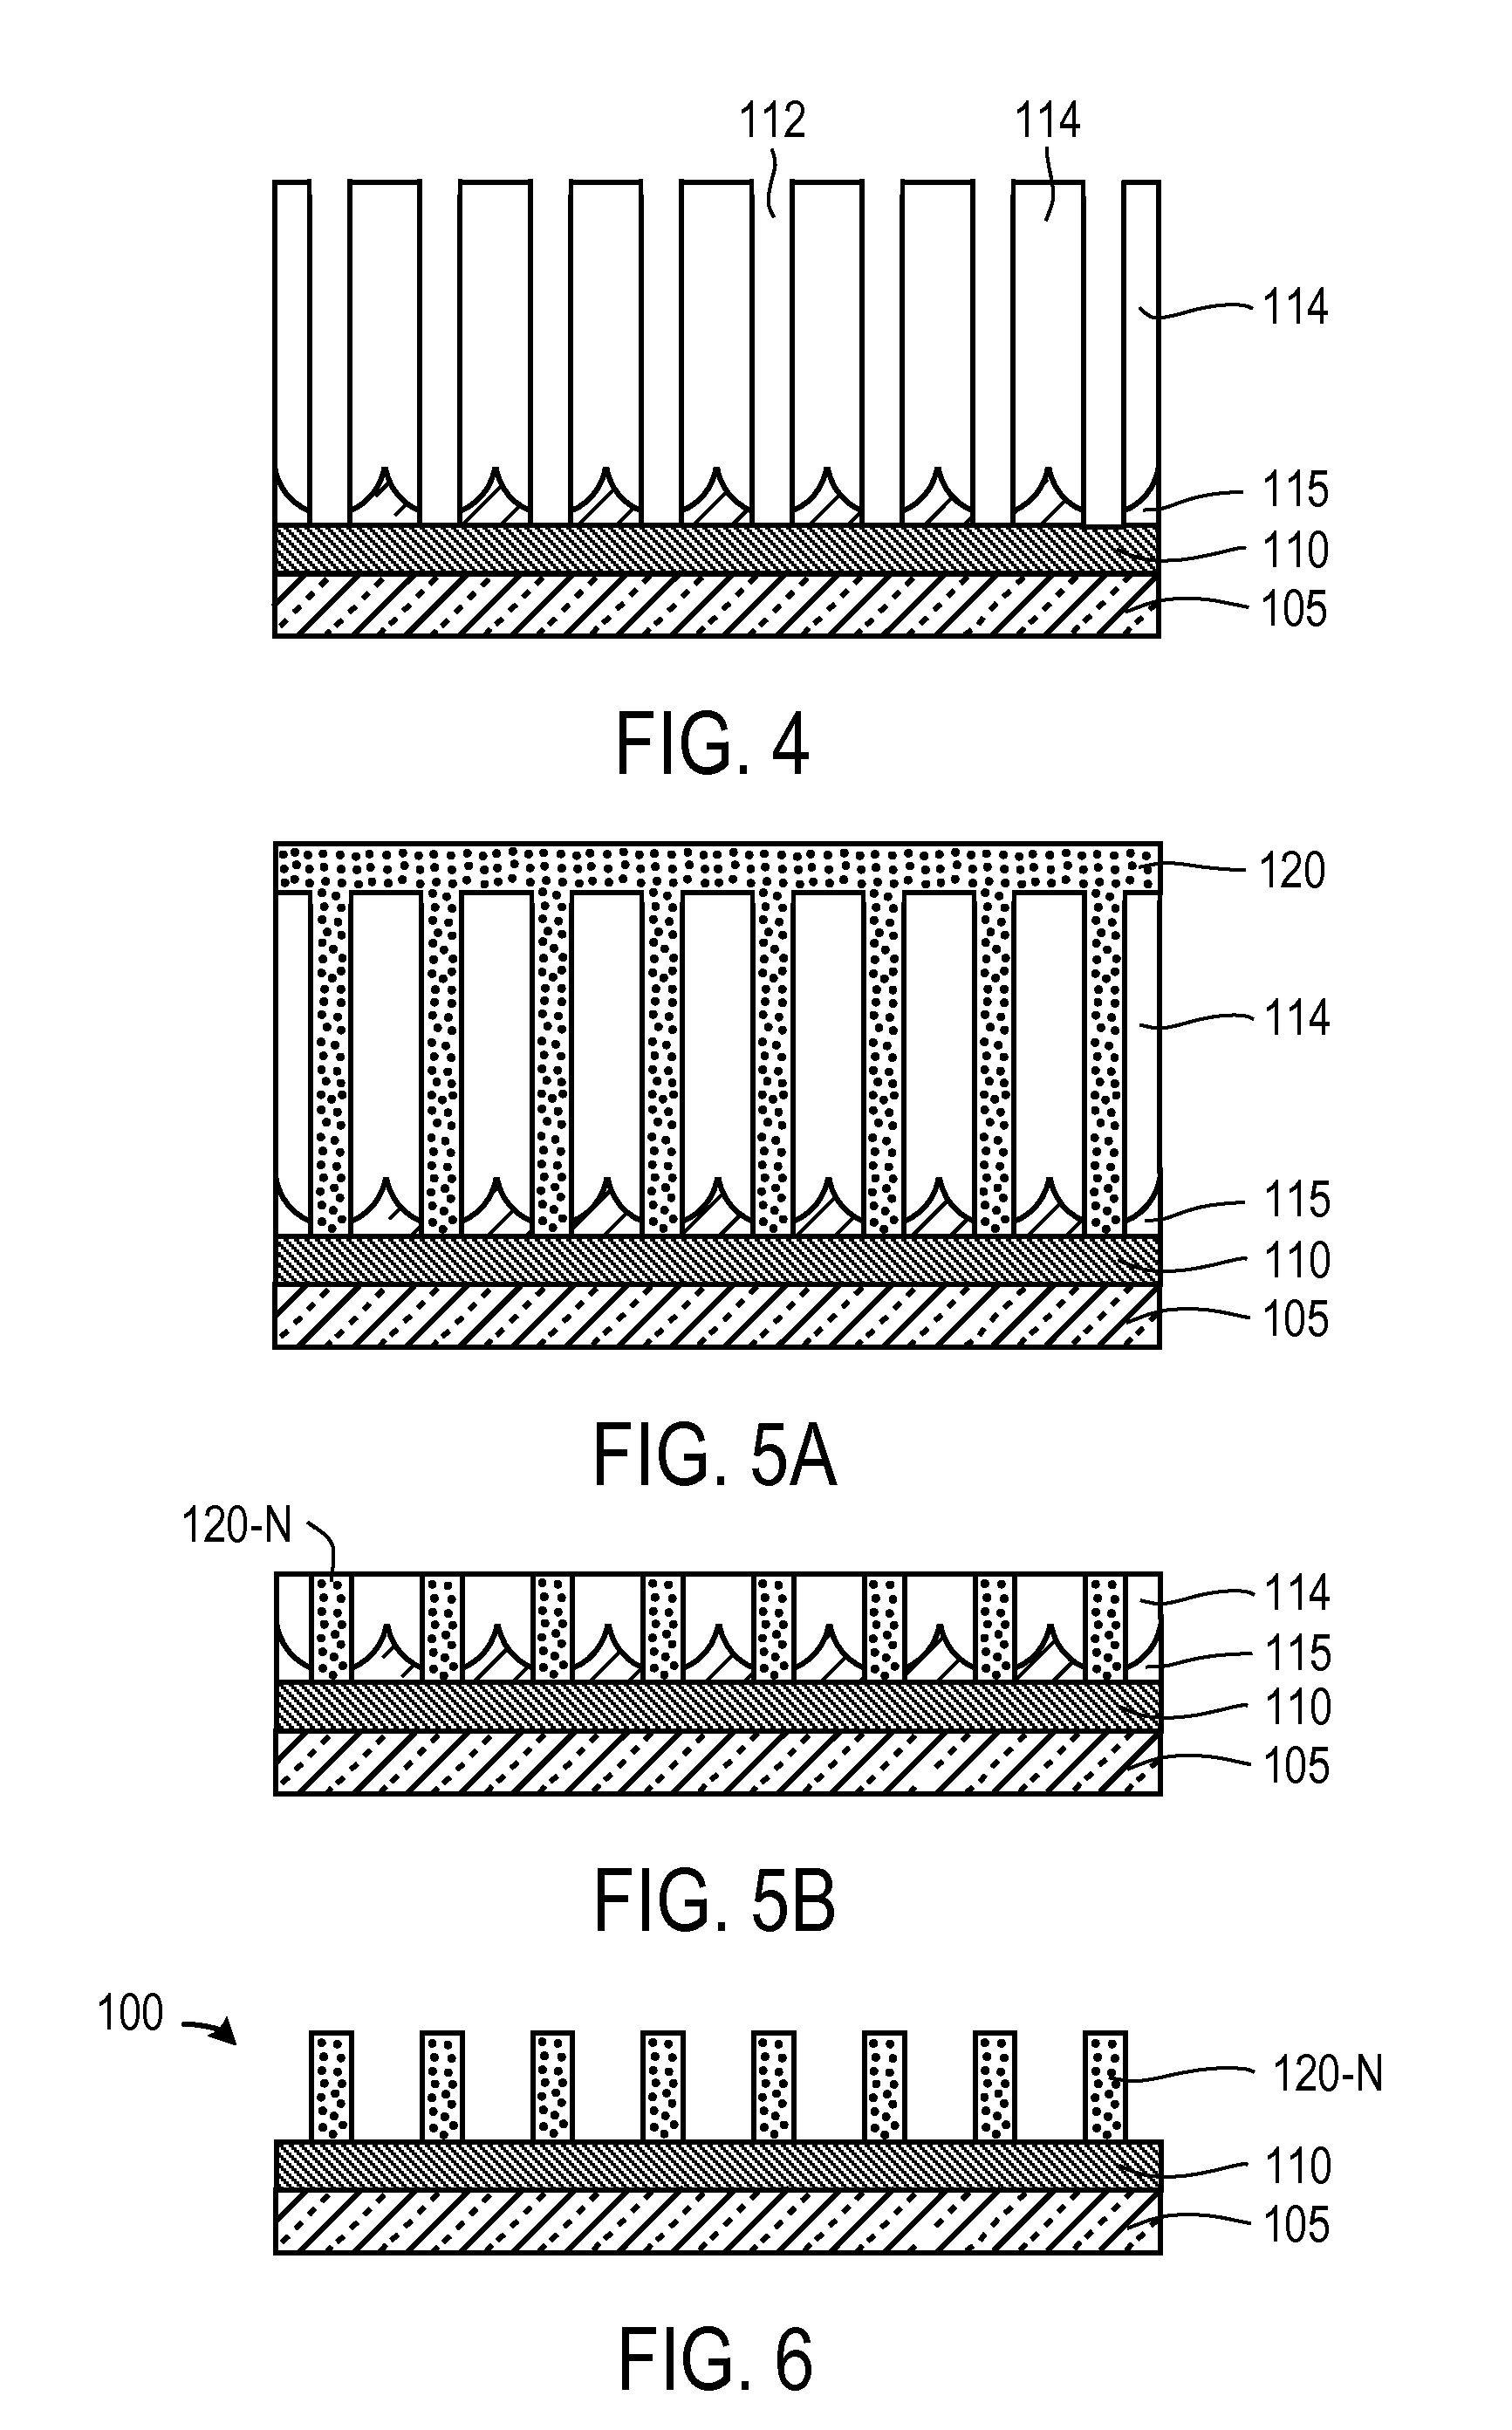 Multi-layer variable micro structure for sensing substance